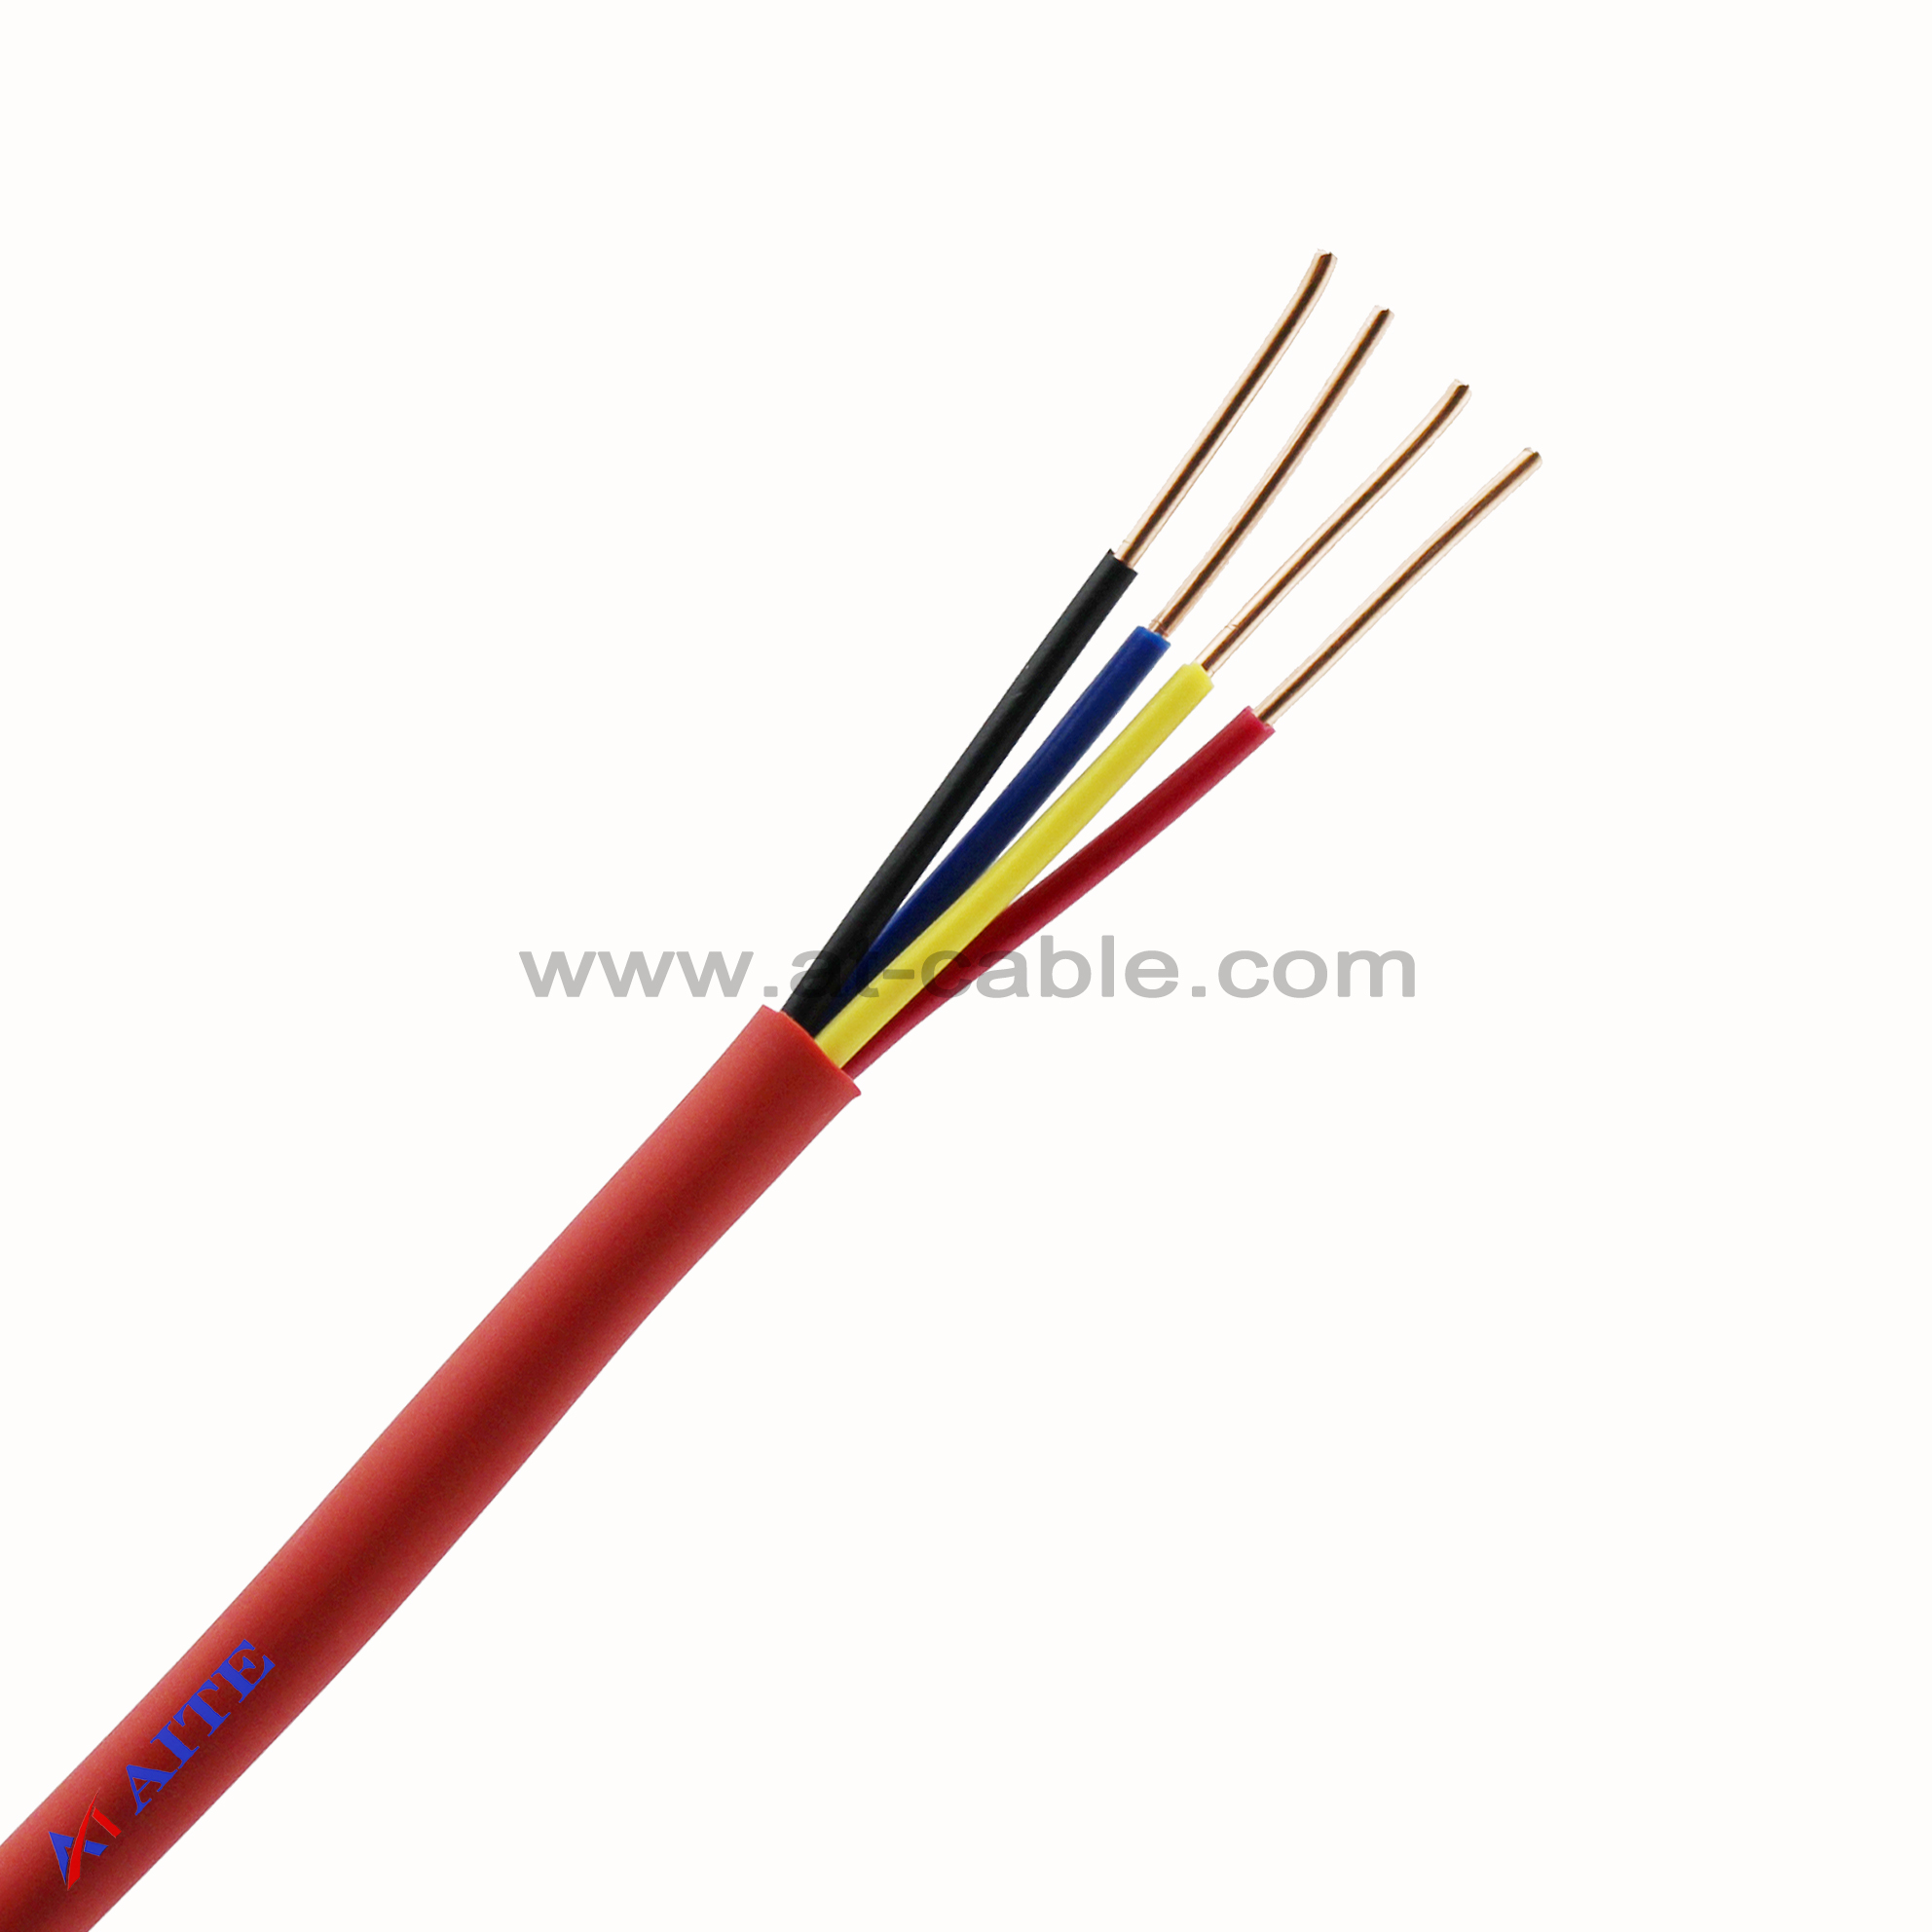 4 Cores Fire Alarm Cable(unshielded) 18 AWG 